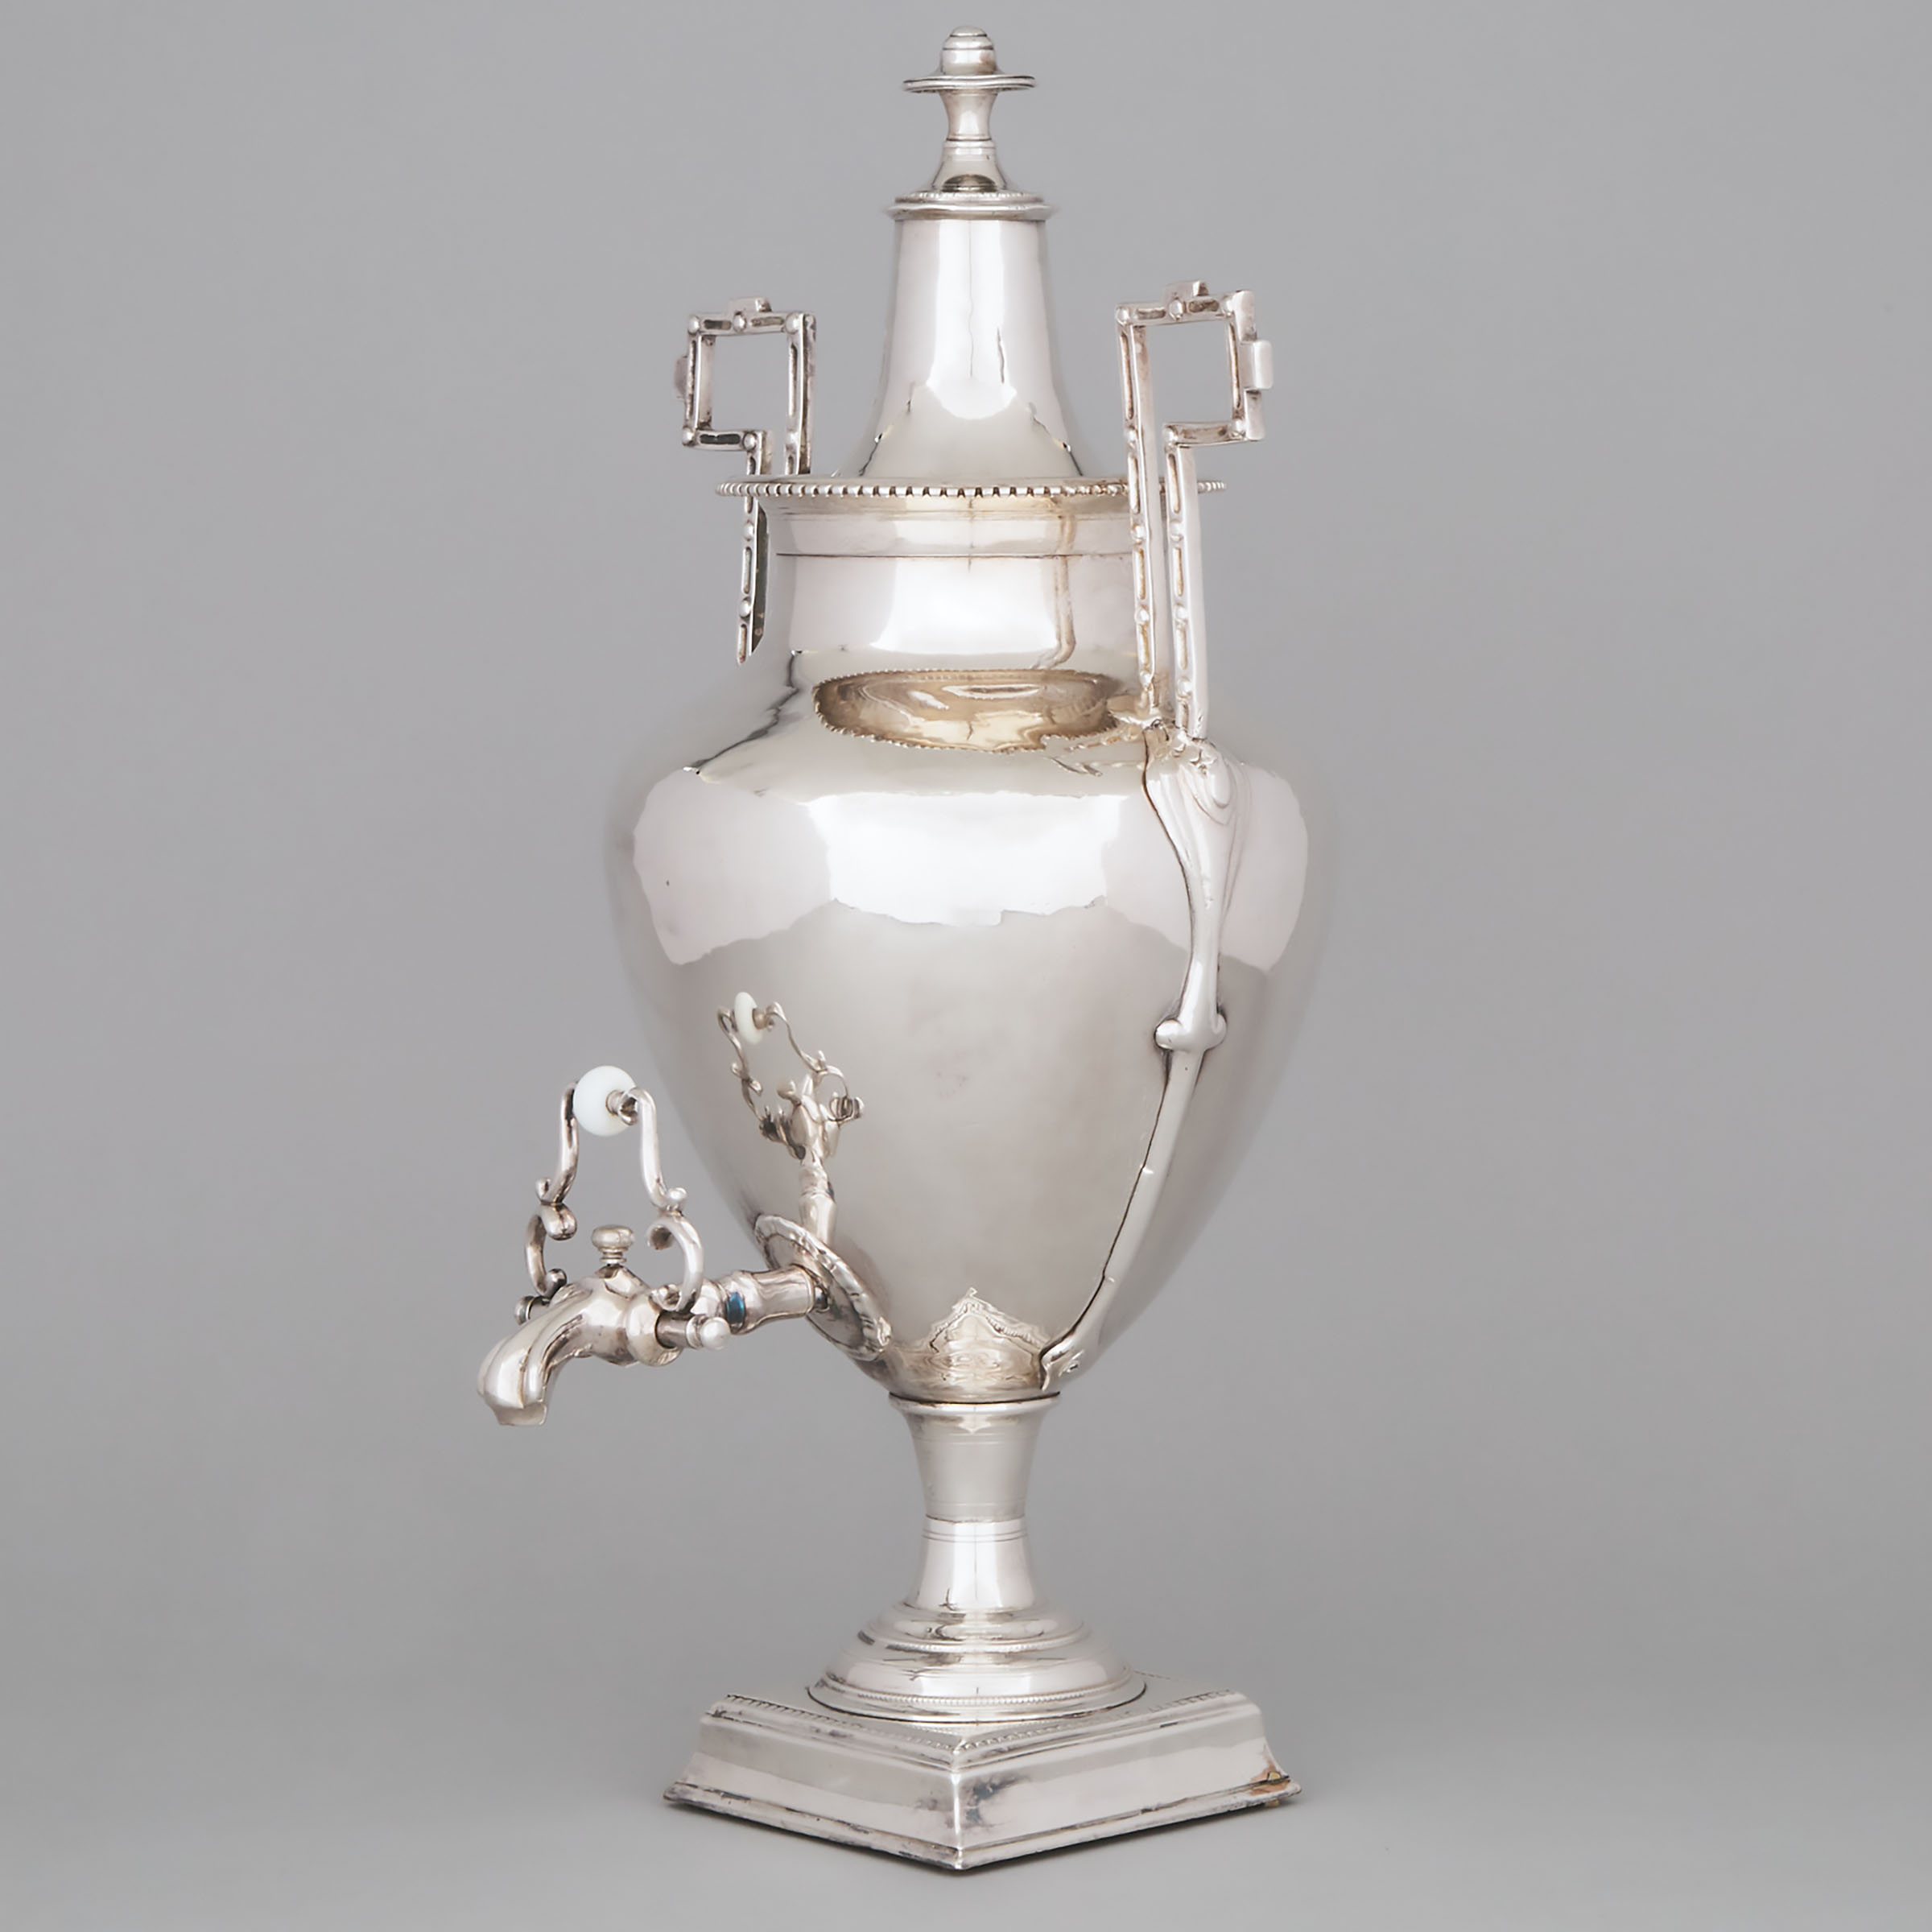 Victorian Silver Plated Tea Urn, late 19th century